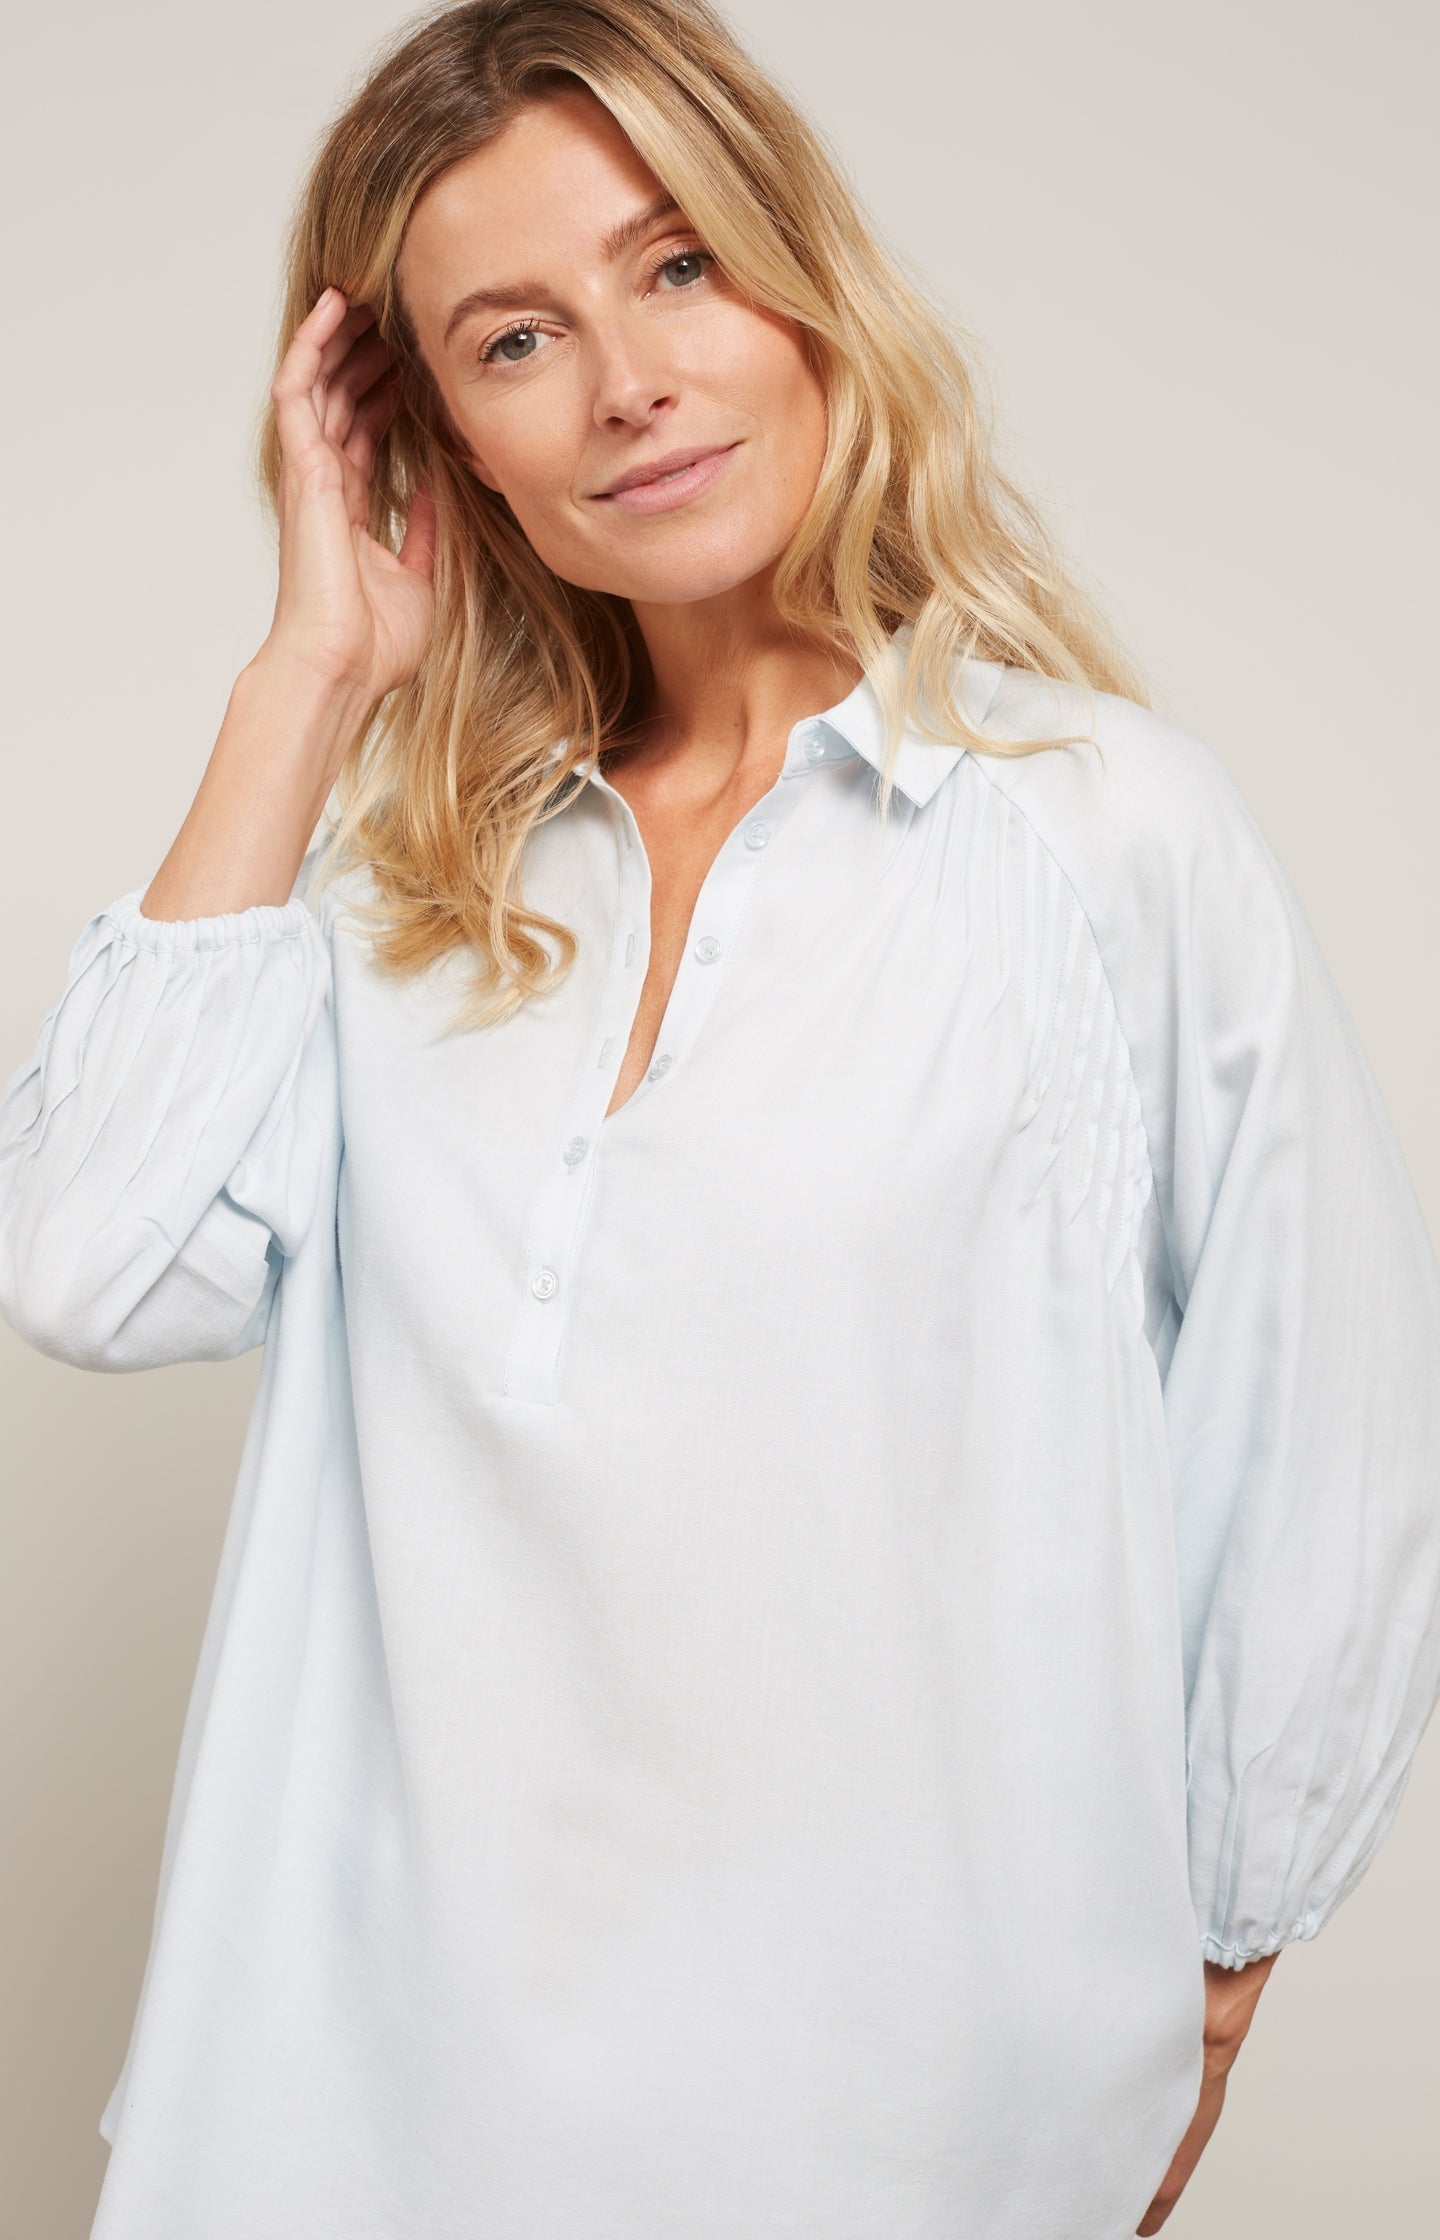 Woven top with collar, 7/8 raglan sleeves and pleated detail